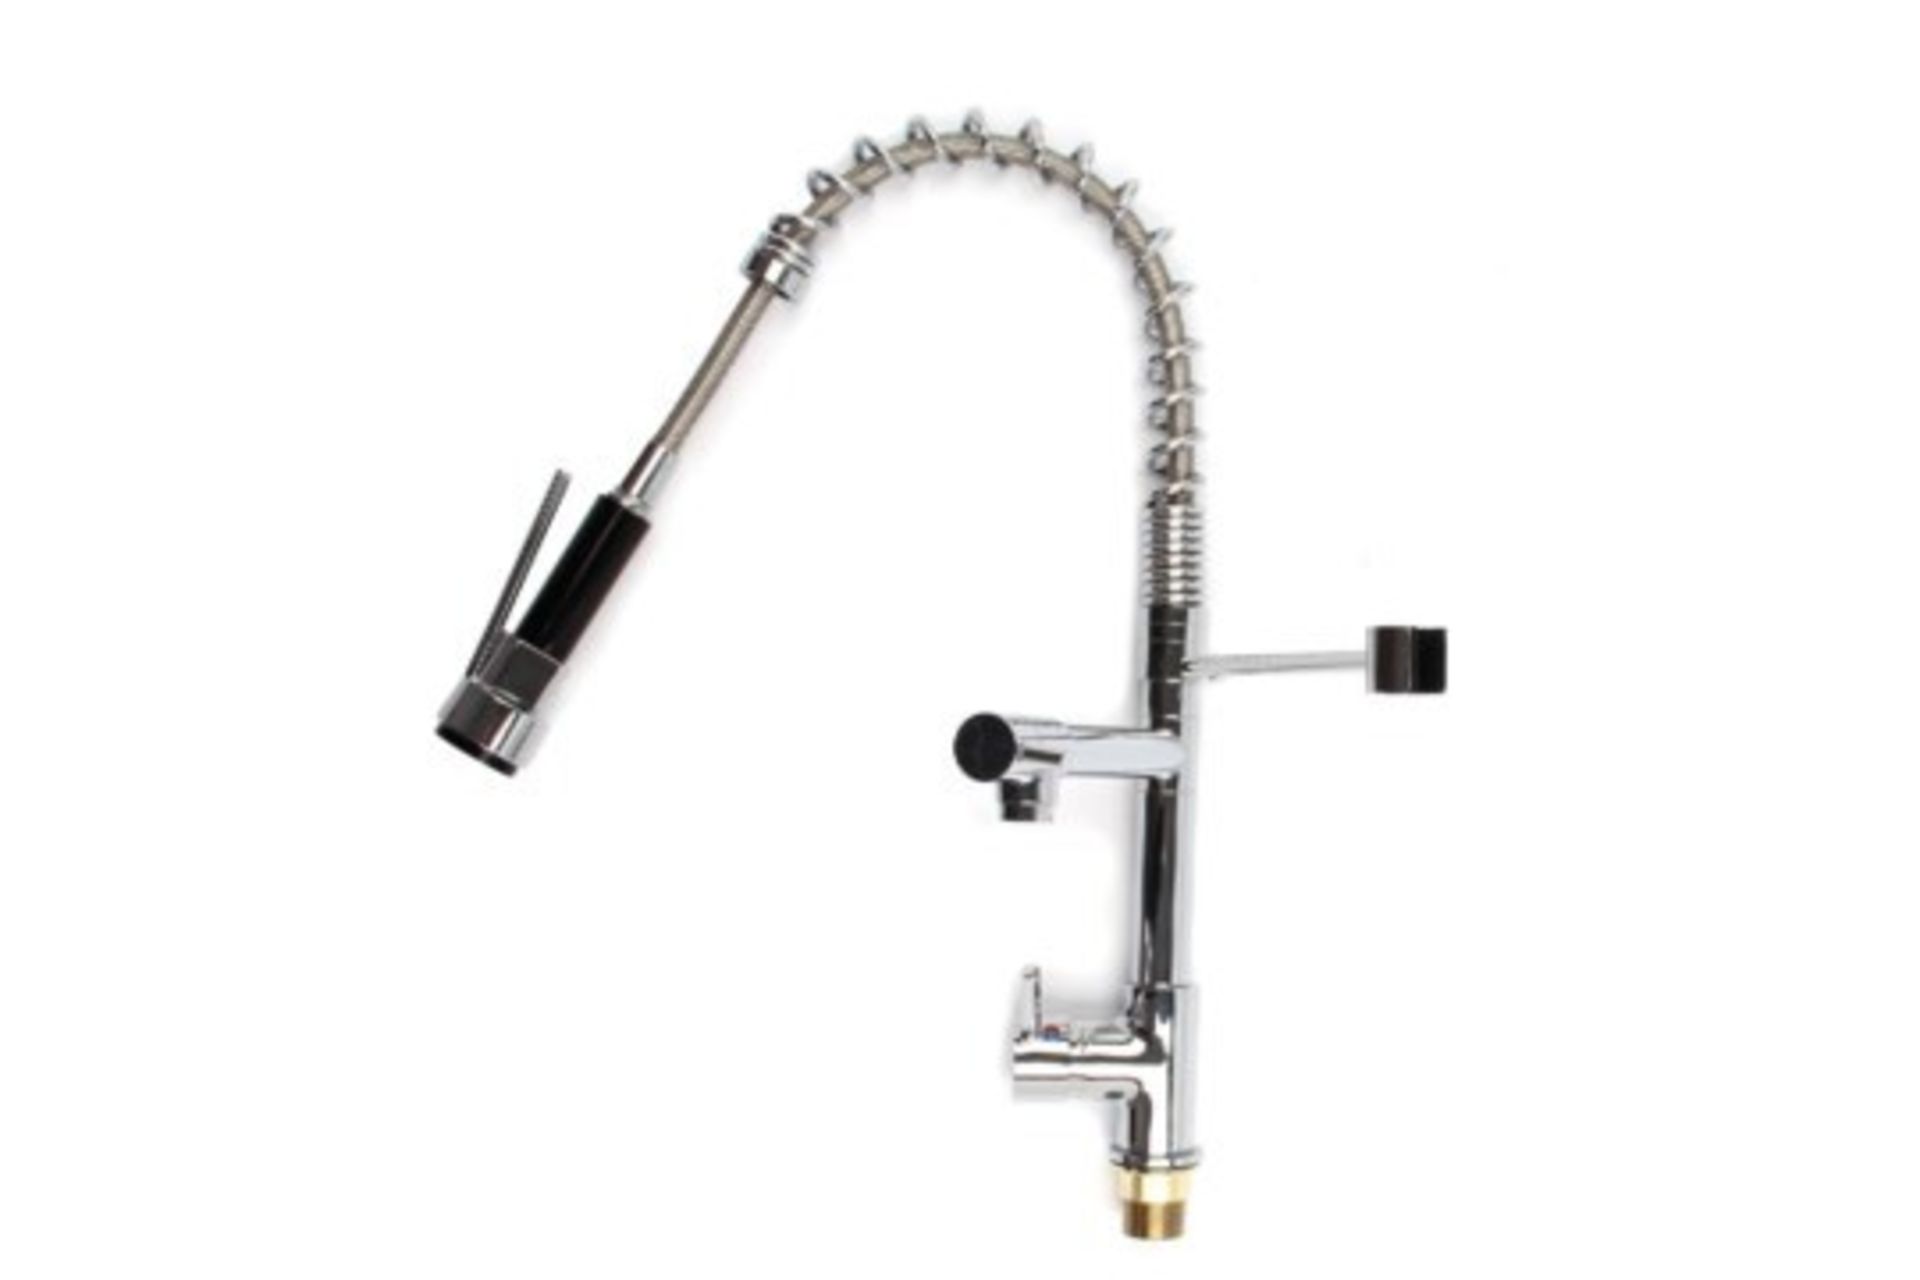 Bentley Modern Monobloc Chrome Brass Pull Out Spray Mixer Tap. RRP £349.99. This tap is from ... - Image 2 of 3